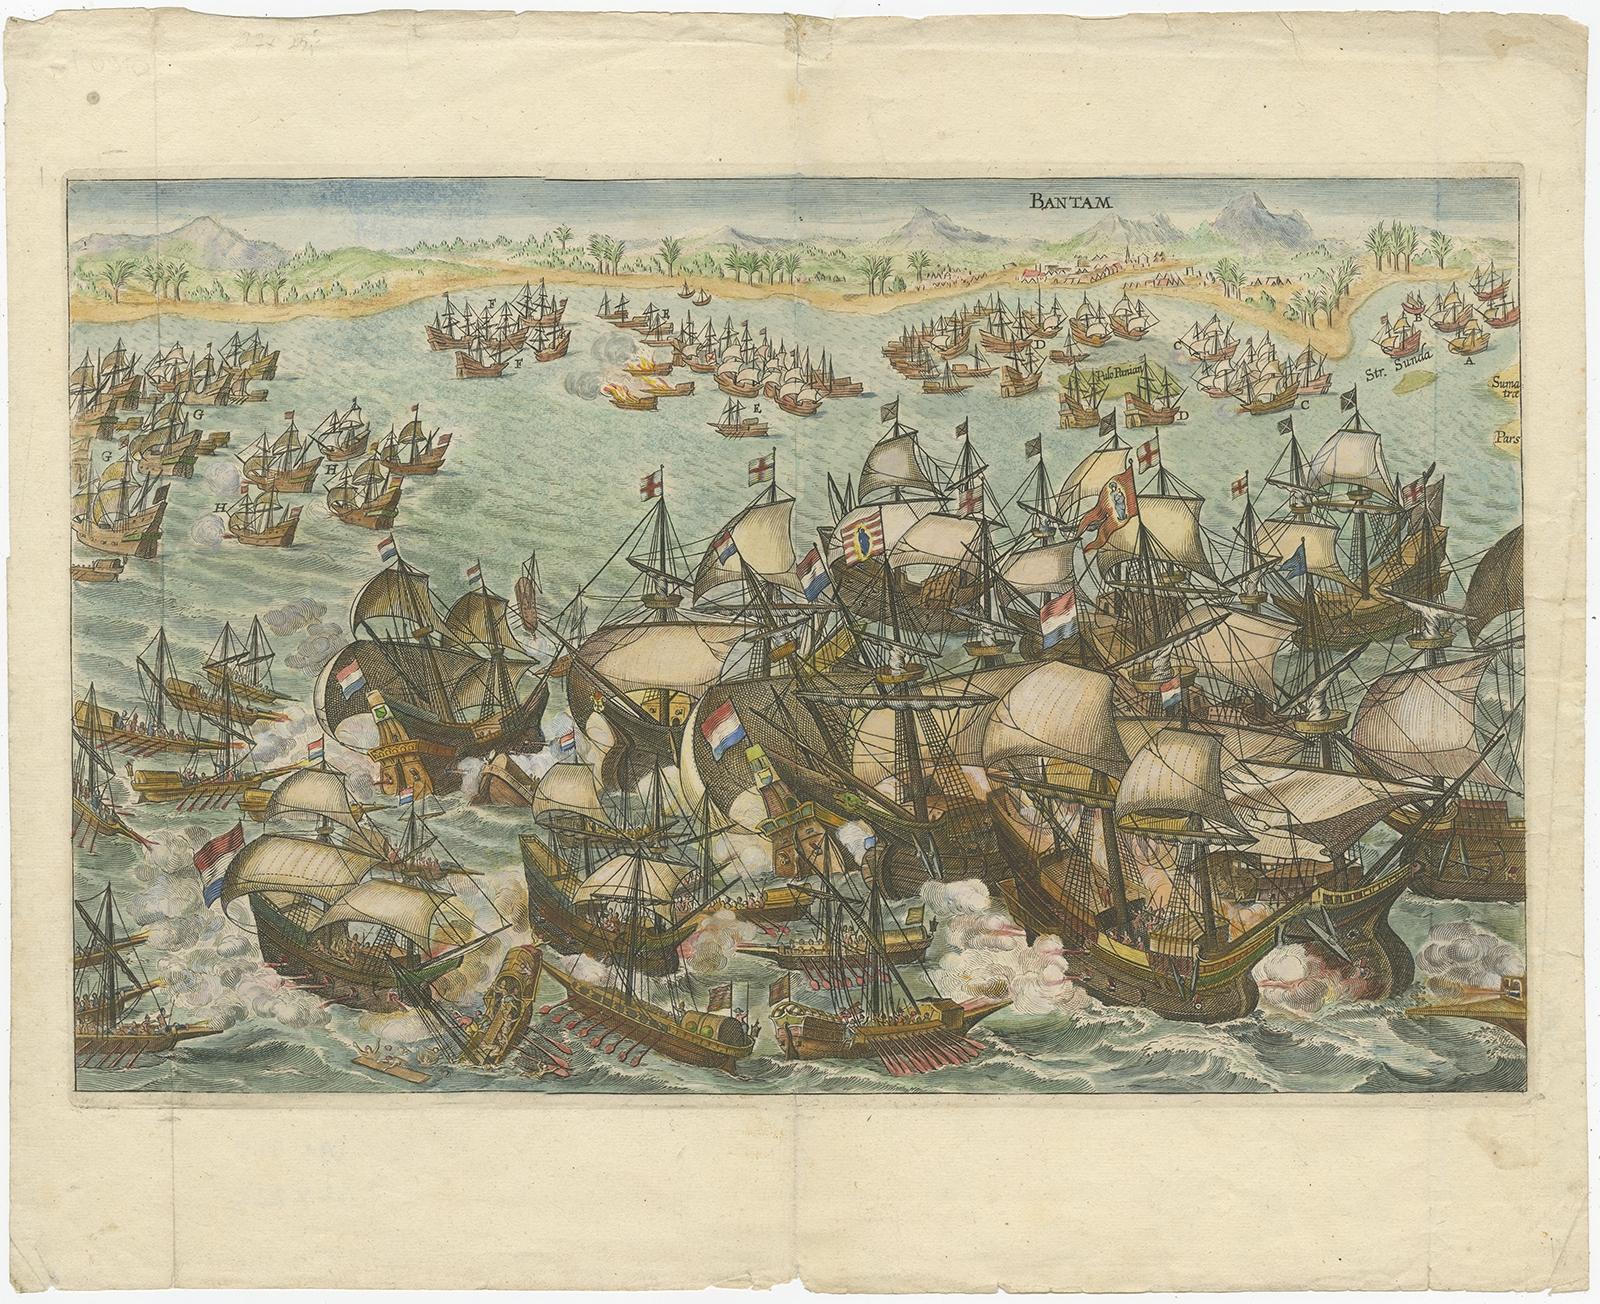 Description: Antique print titled 'Bantam'. Copper engraving of the Dutch attack on the Portuguese fleet off Bantam in 1601 depicted as the victory of Admiral Wolfert Harmensz and his 5 ships over 30 Portuguese ships. The ships in the battle include